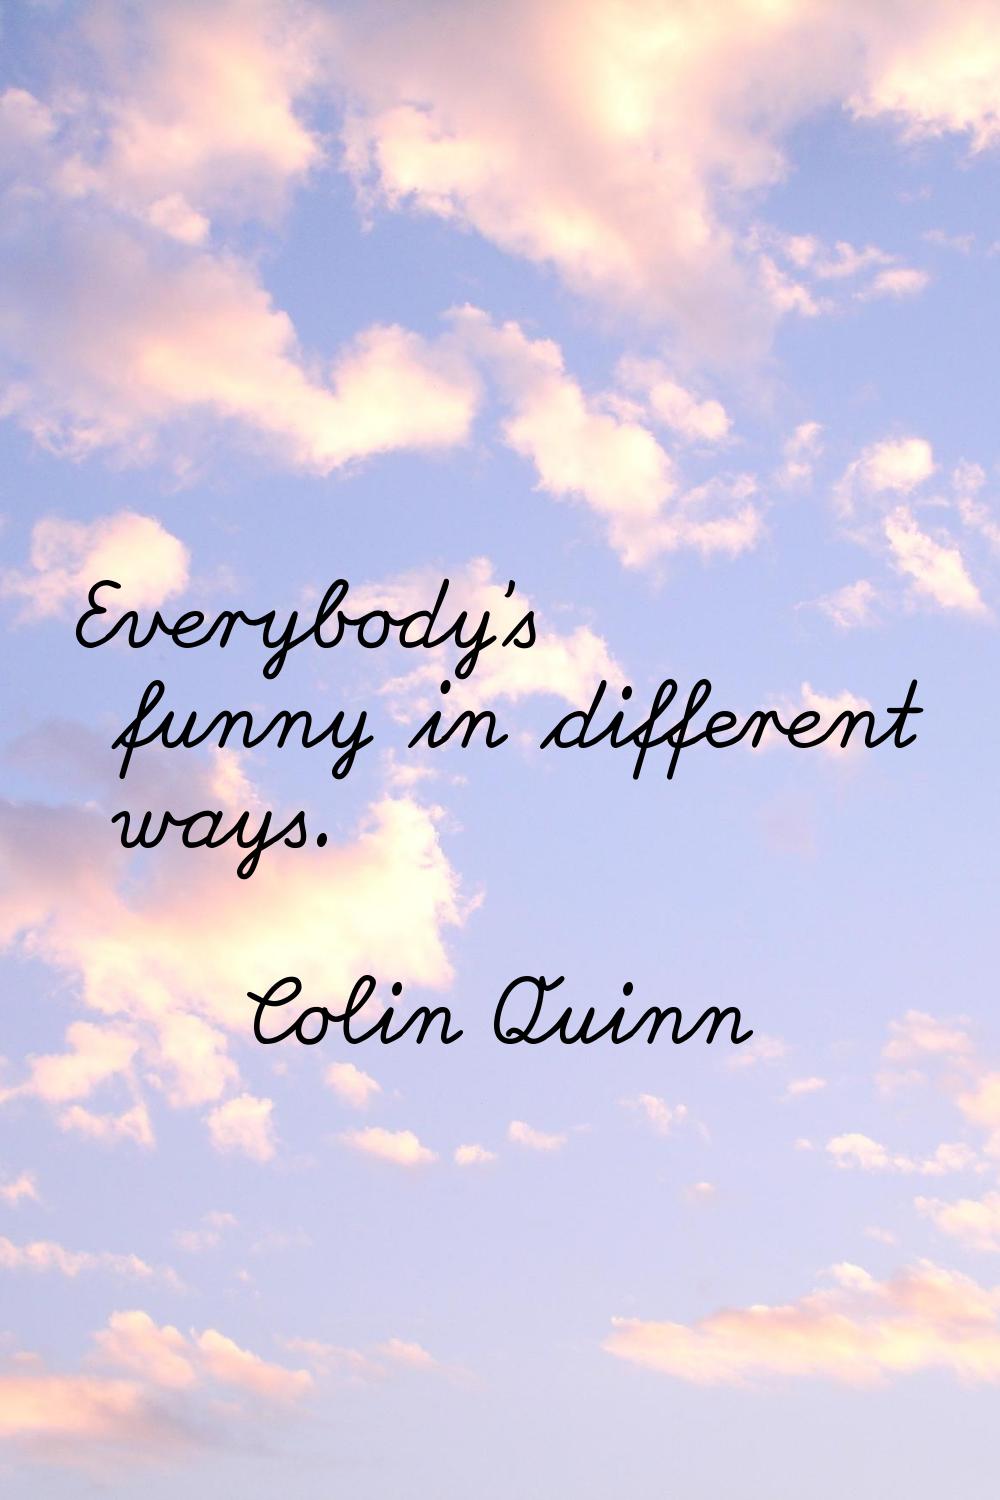 Everybody's funny in different ways.